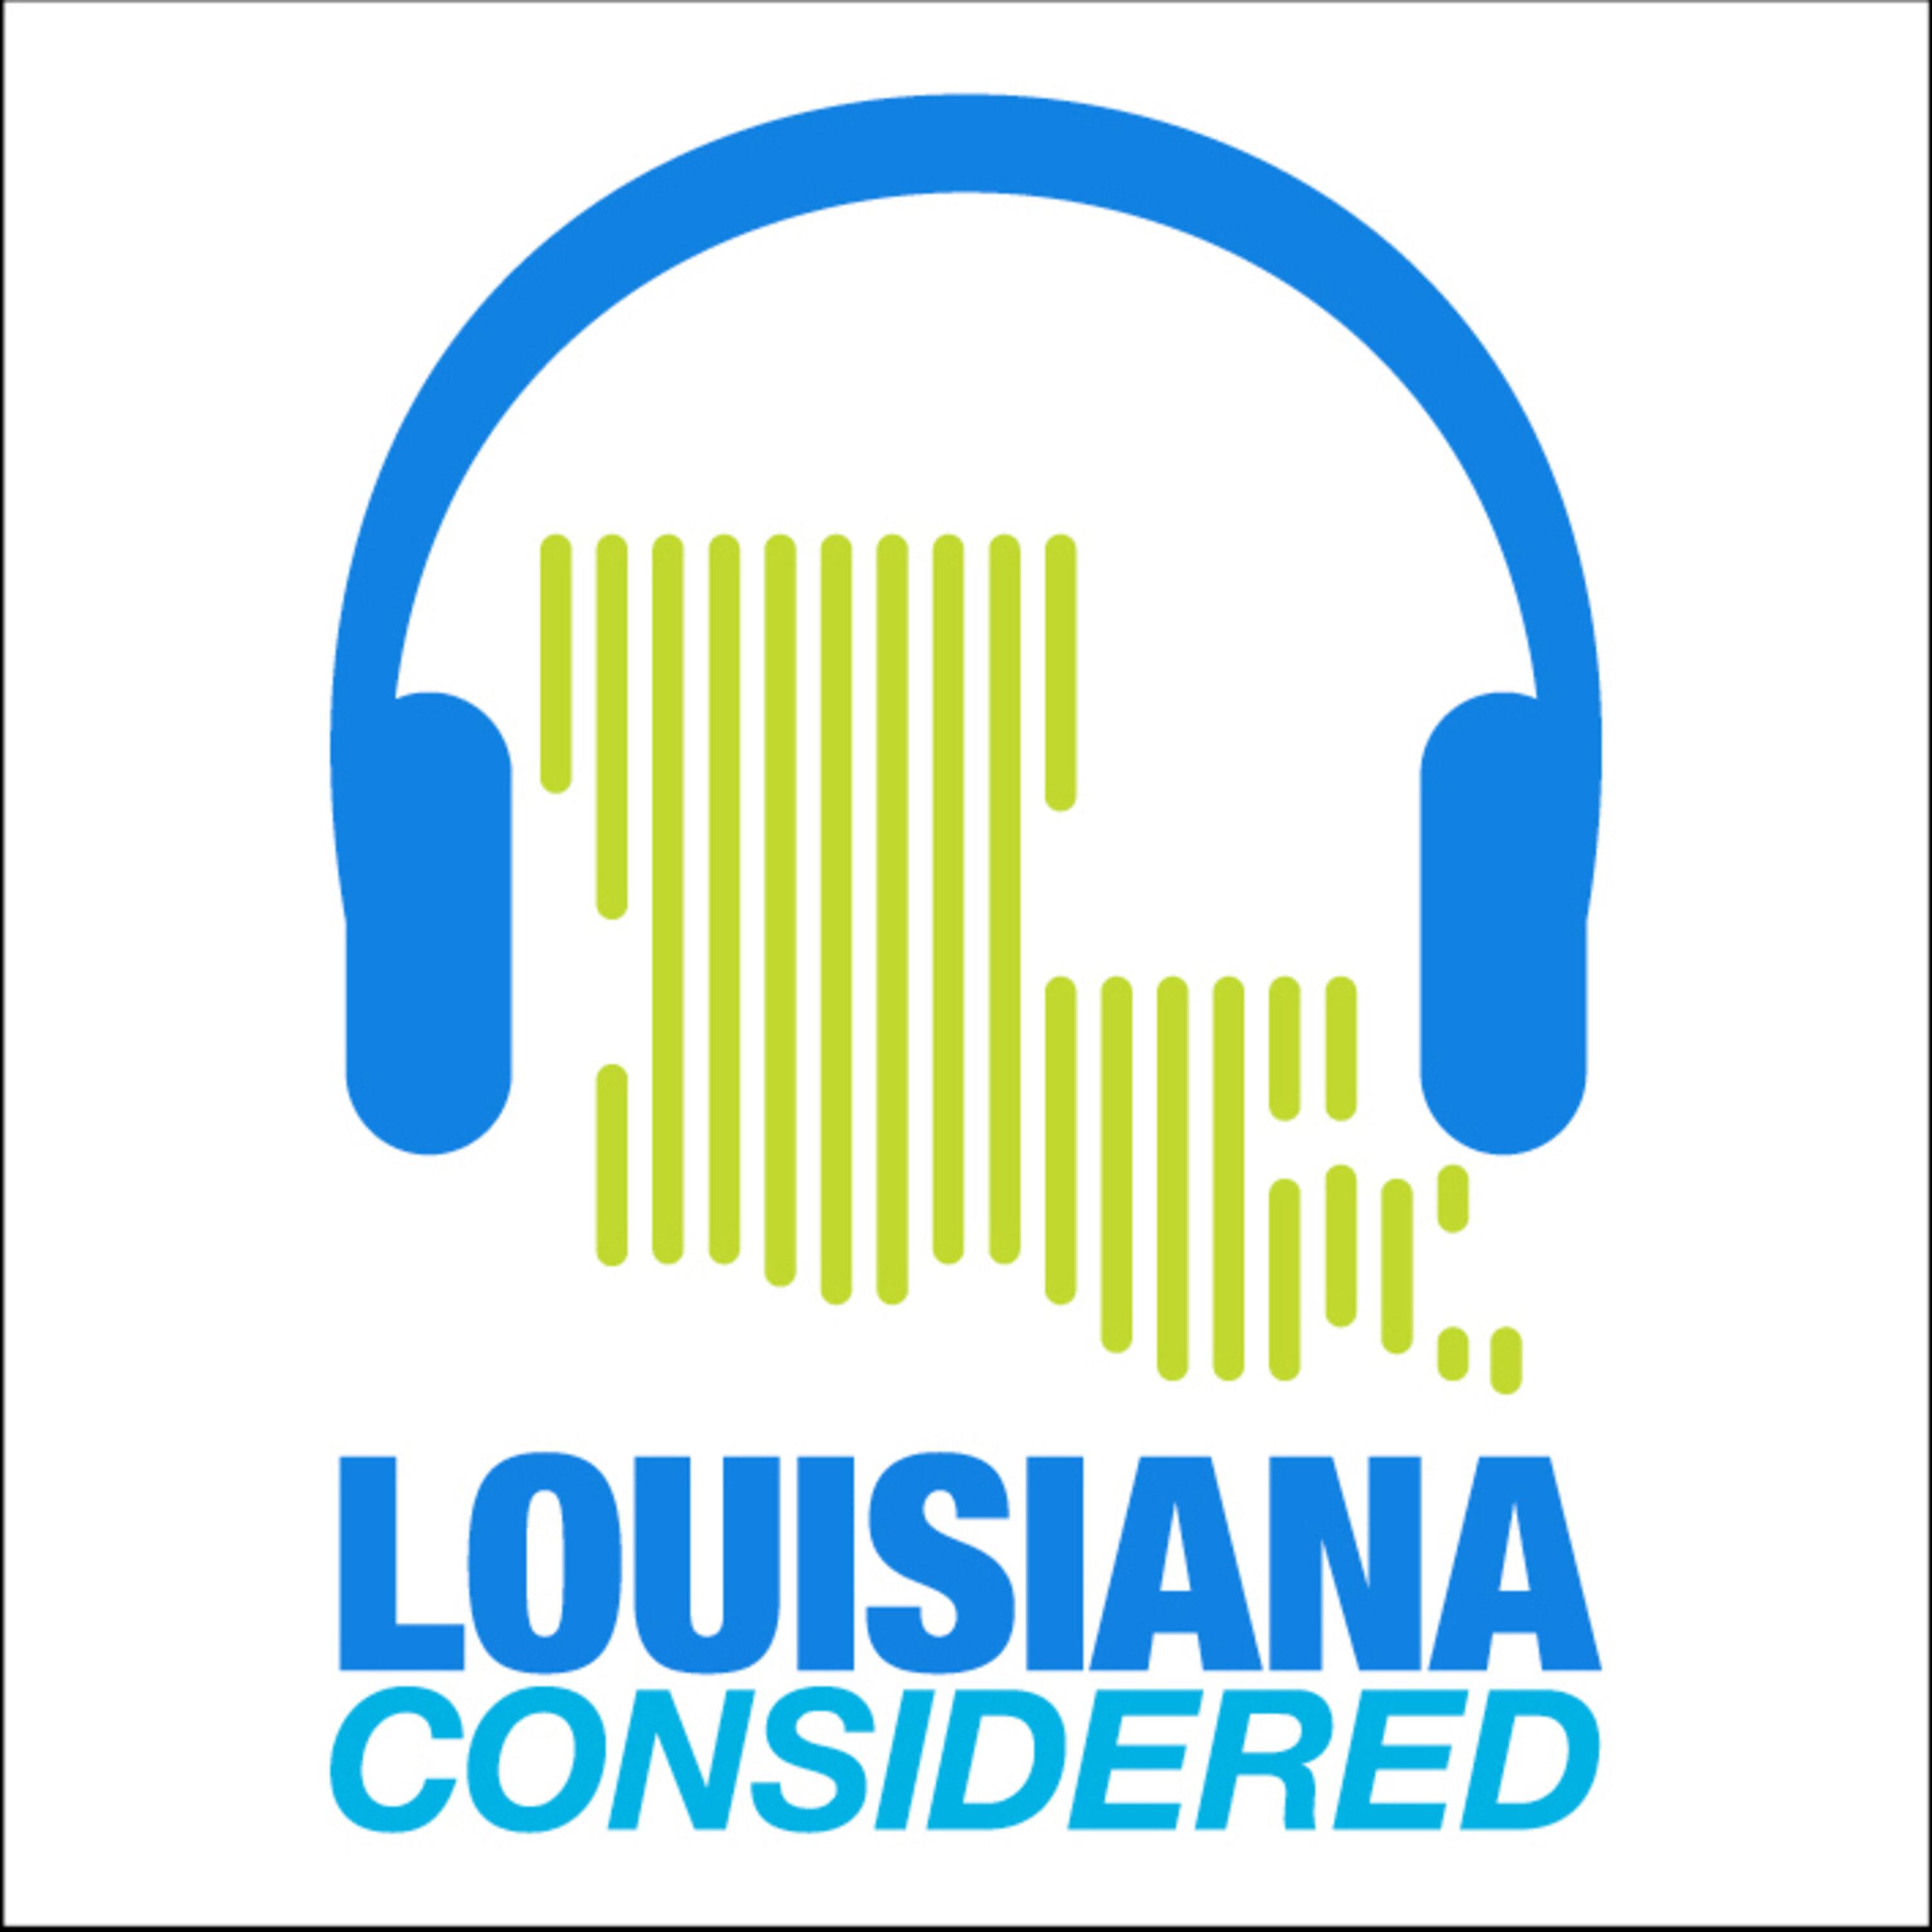 Thumbnail for "Louisiana Considered: A look at the state’s newest political hopefuls".